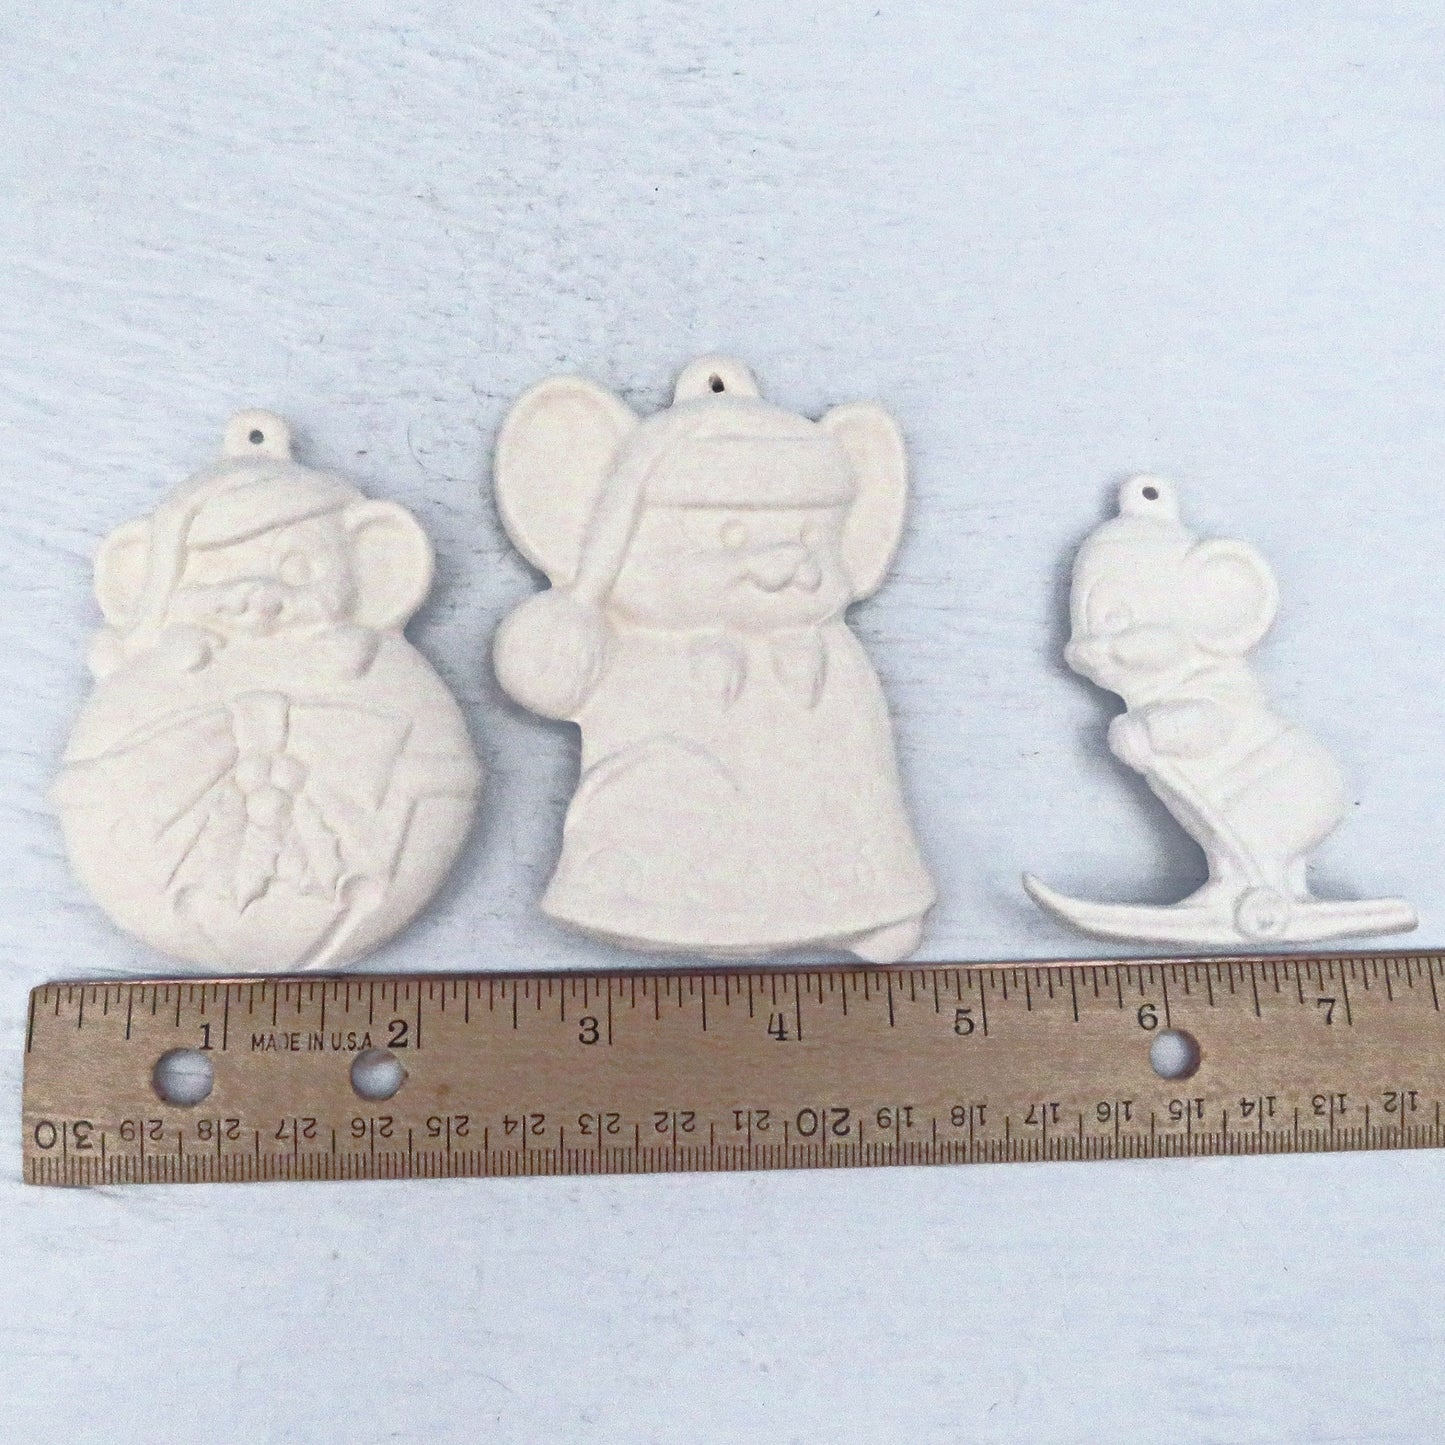 Handmade Ready to Paint Set of 3 Mouse Christmas Ornaments